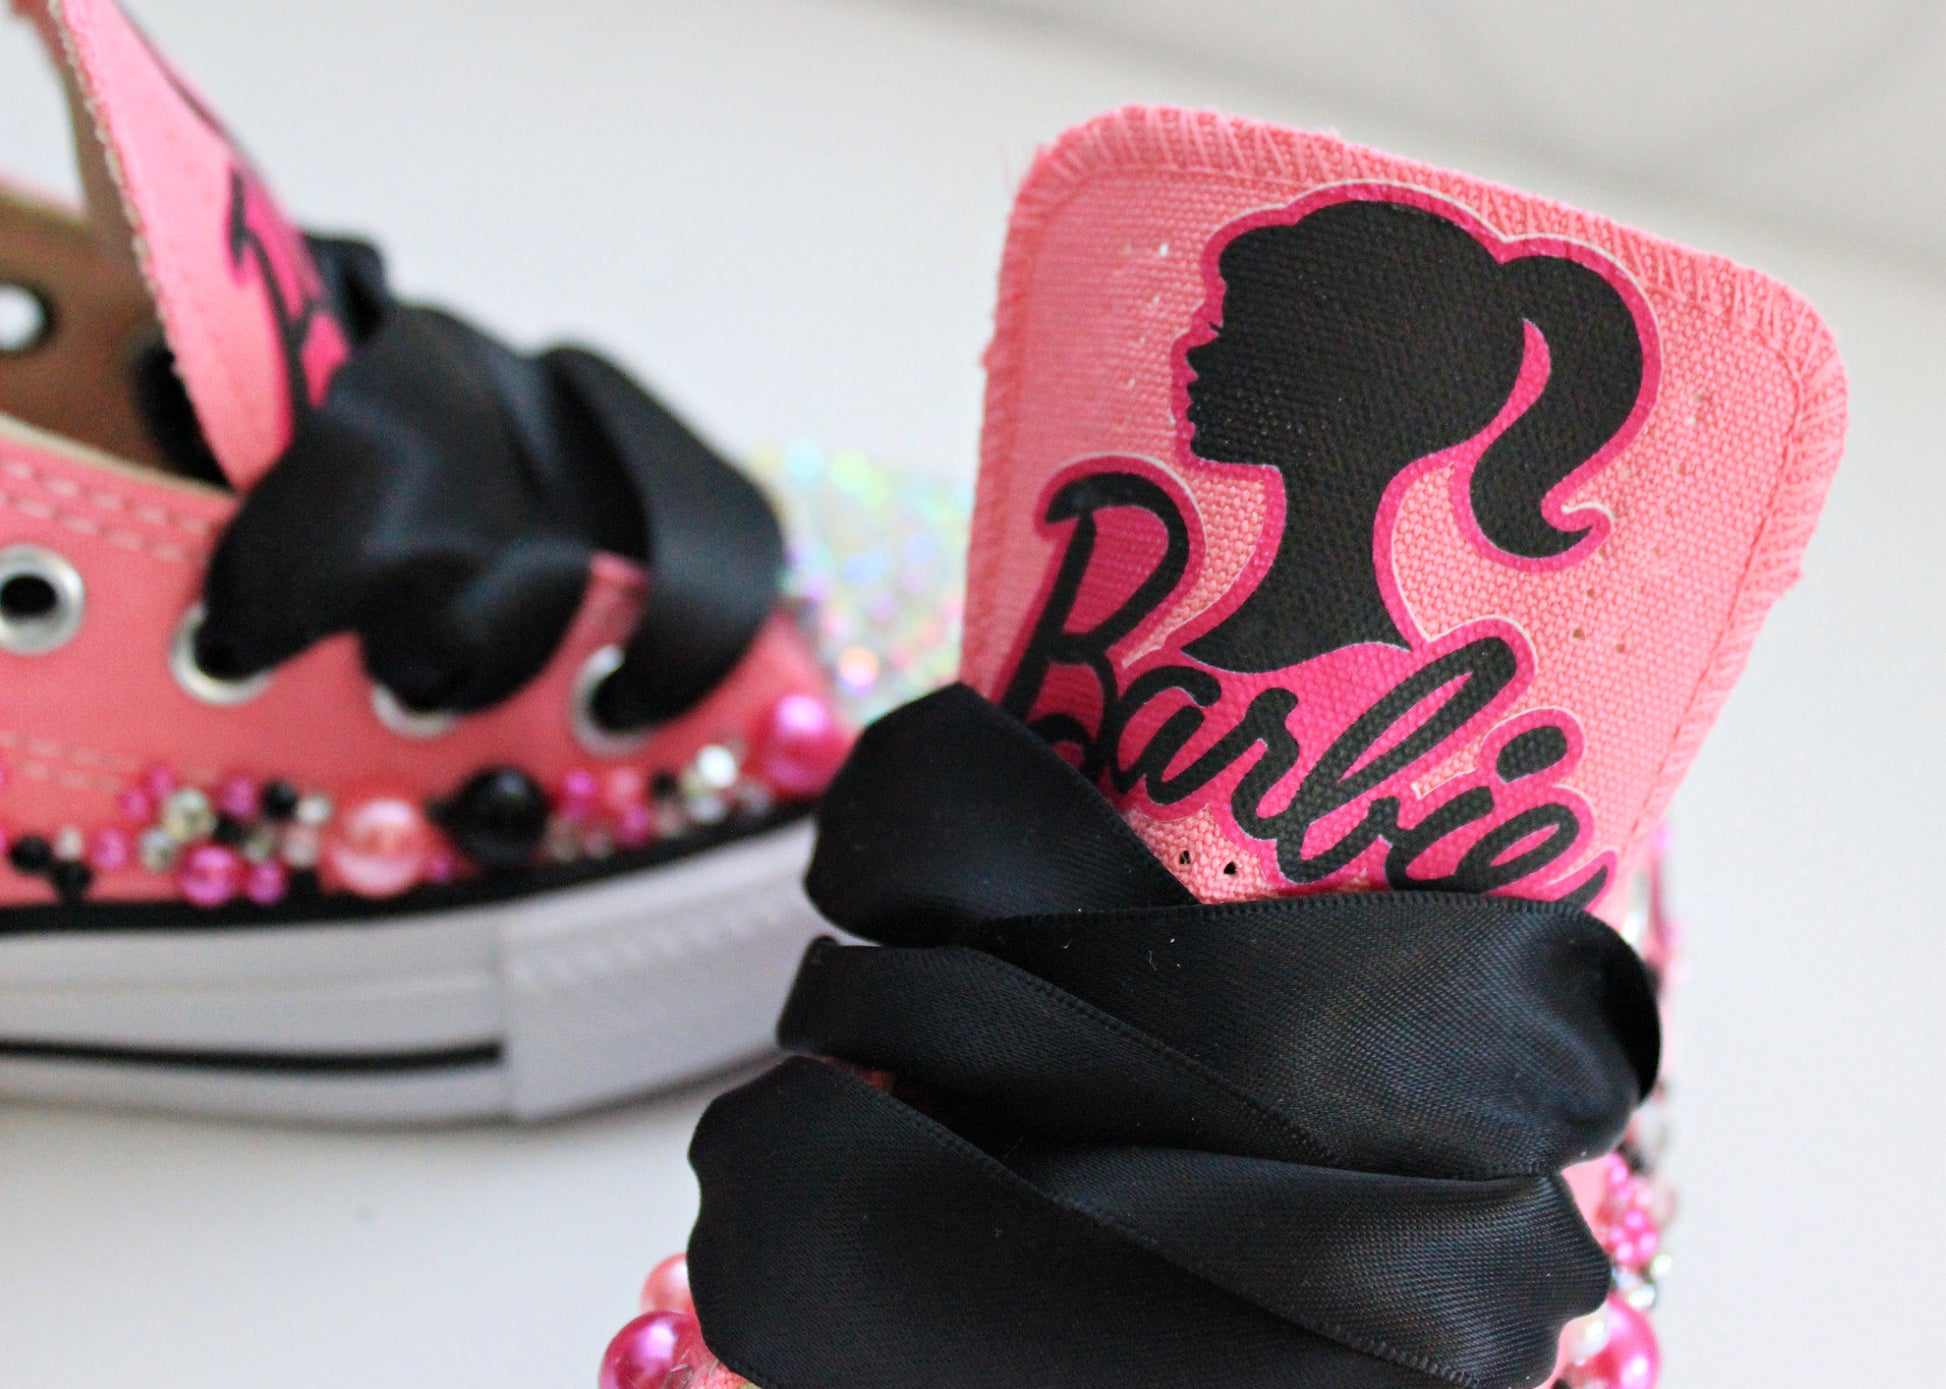 Pin by Cris on ♡Pink♡  Barbie shoes, Barbie girl, Doll shoes